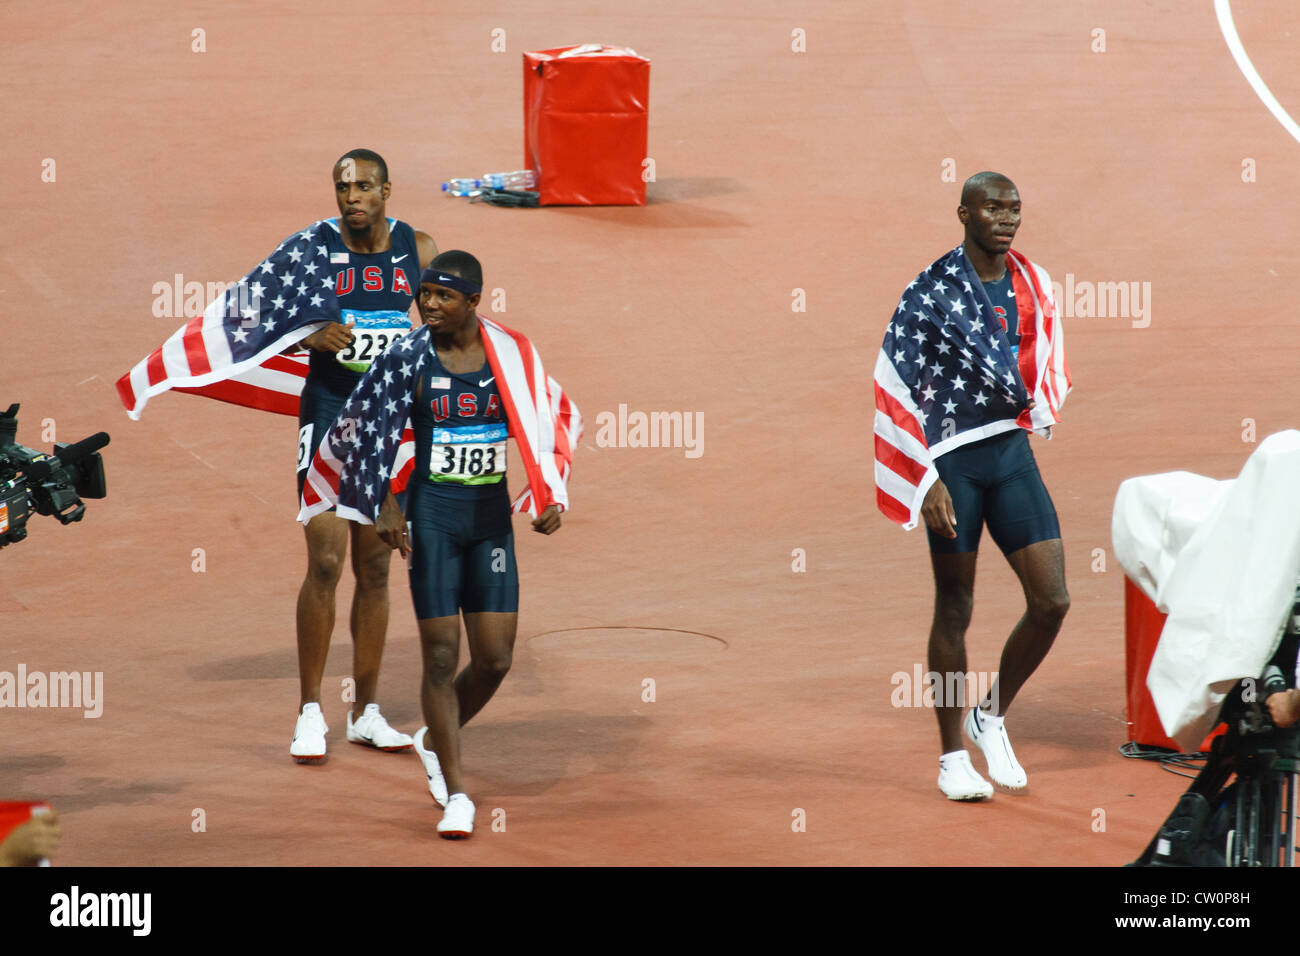 Angelo Taylor Kerron Clement and Bershawn Jackson take a victory lap after USA sweeps men's  400 meter hurdles with all medals Stock Photo